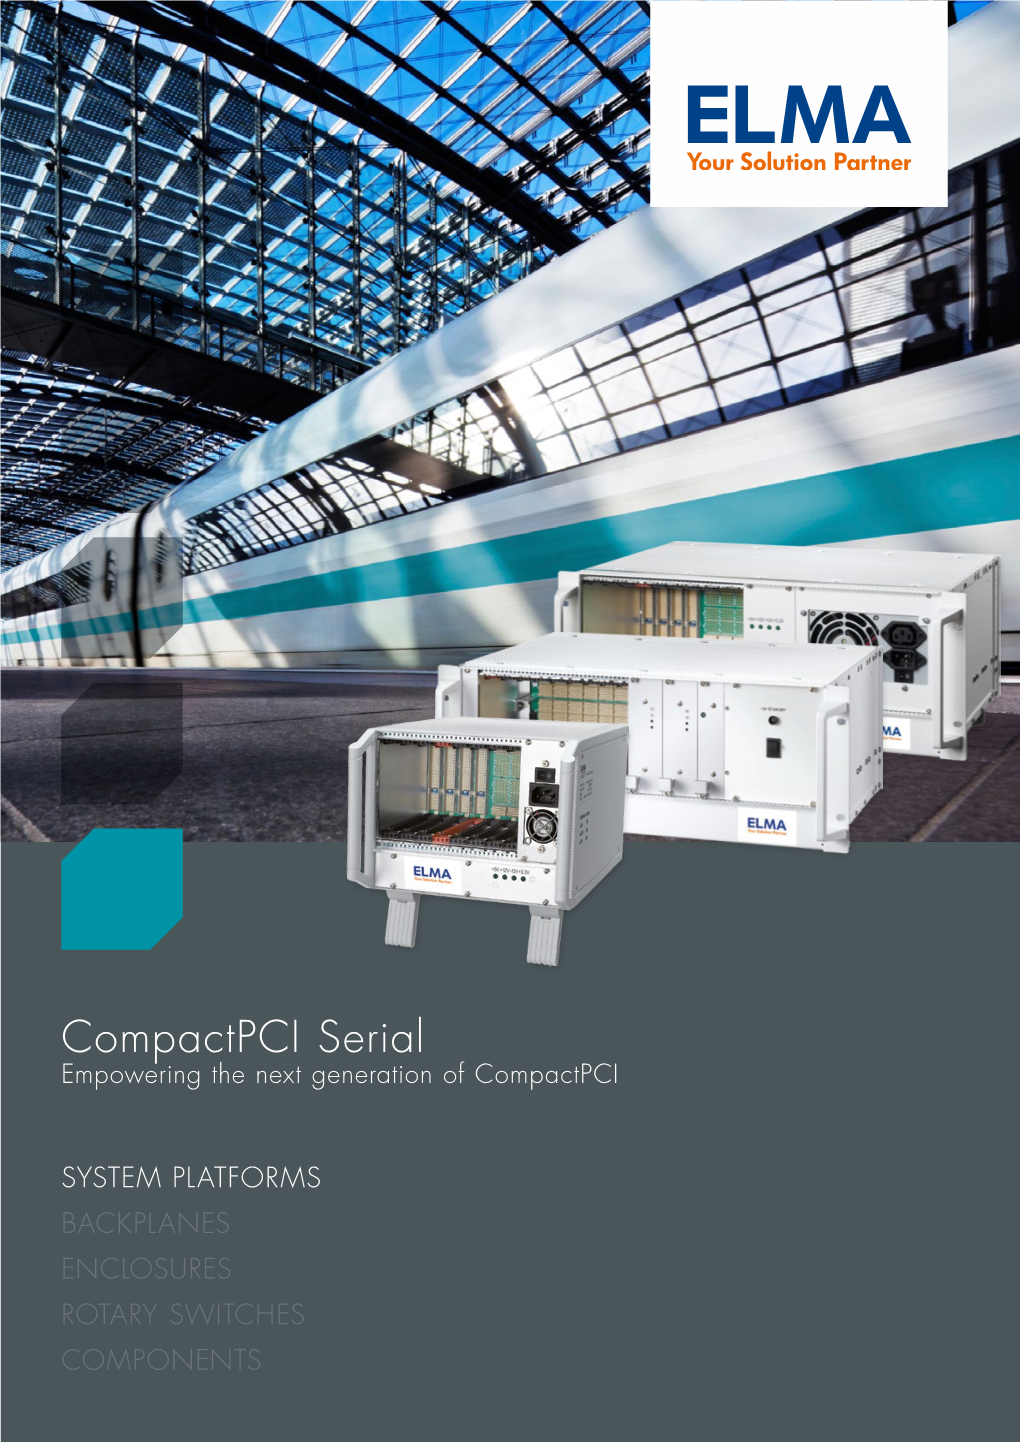 Compactpci Serial Empowering the Next Generation of Compactpci